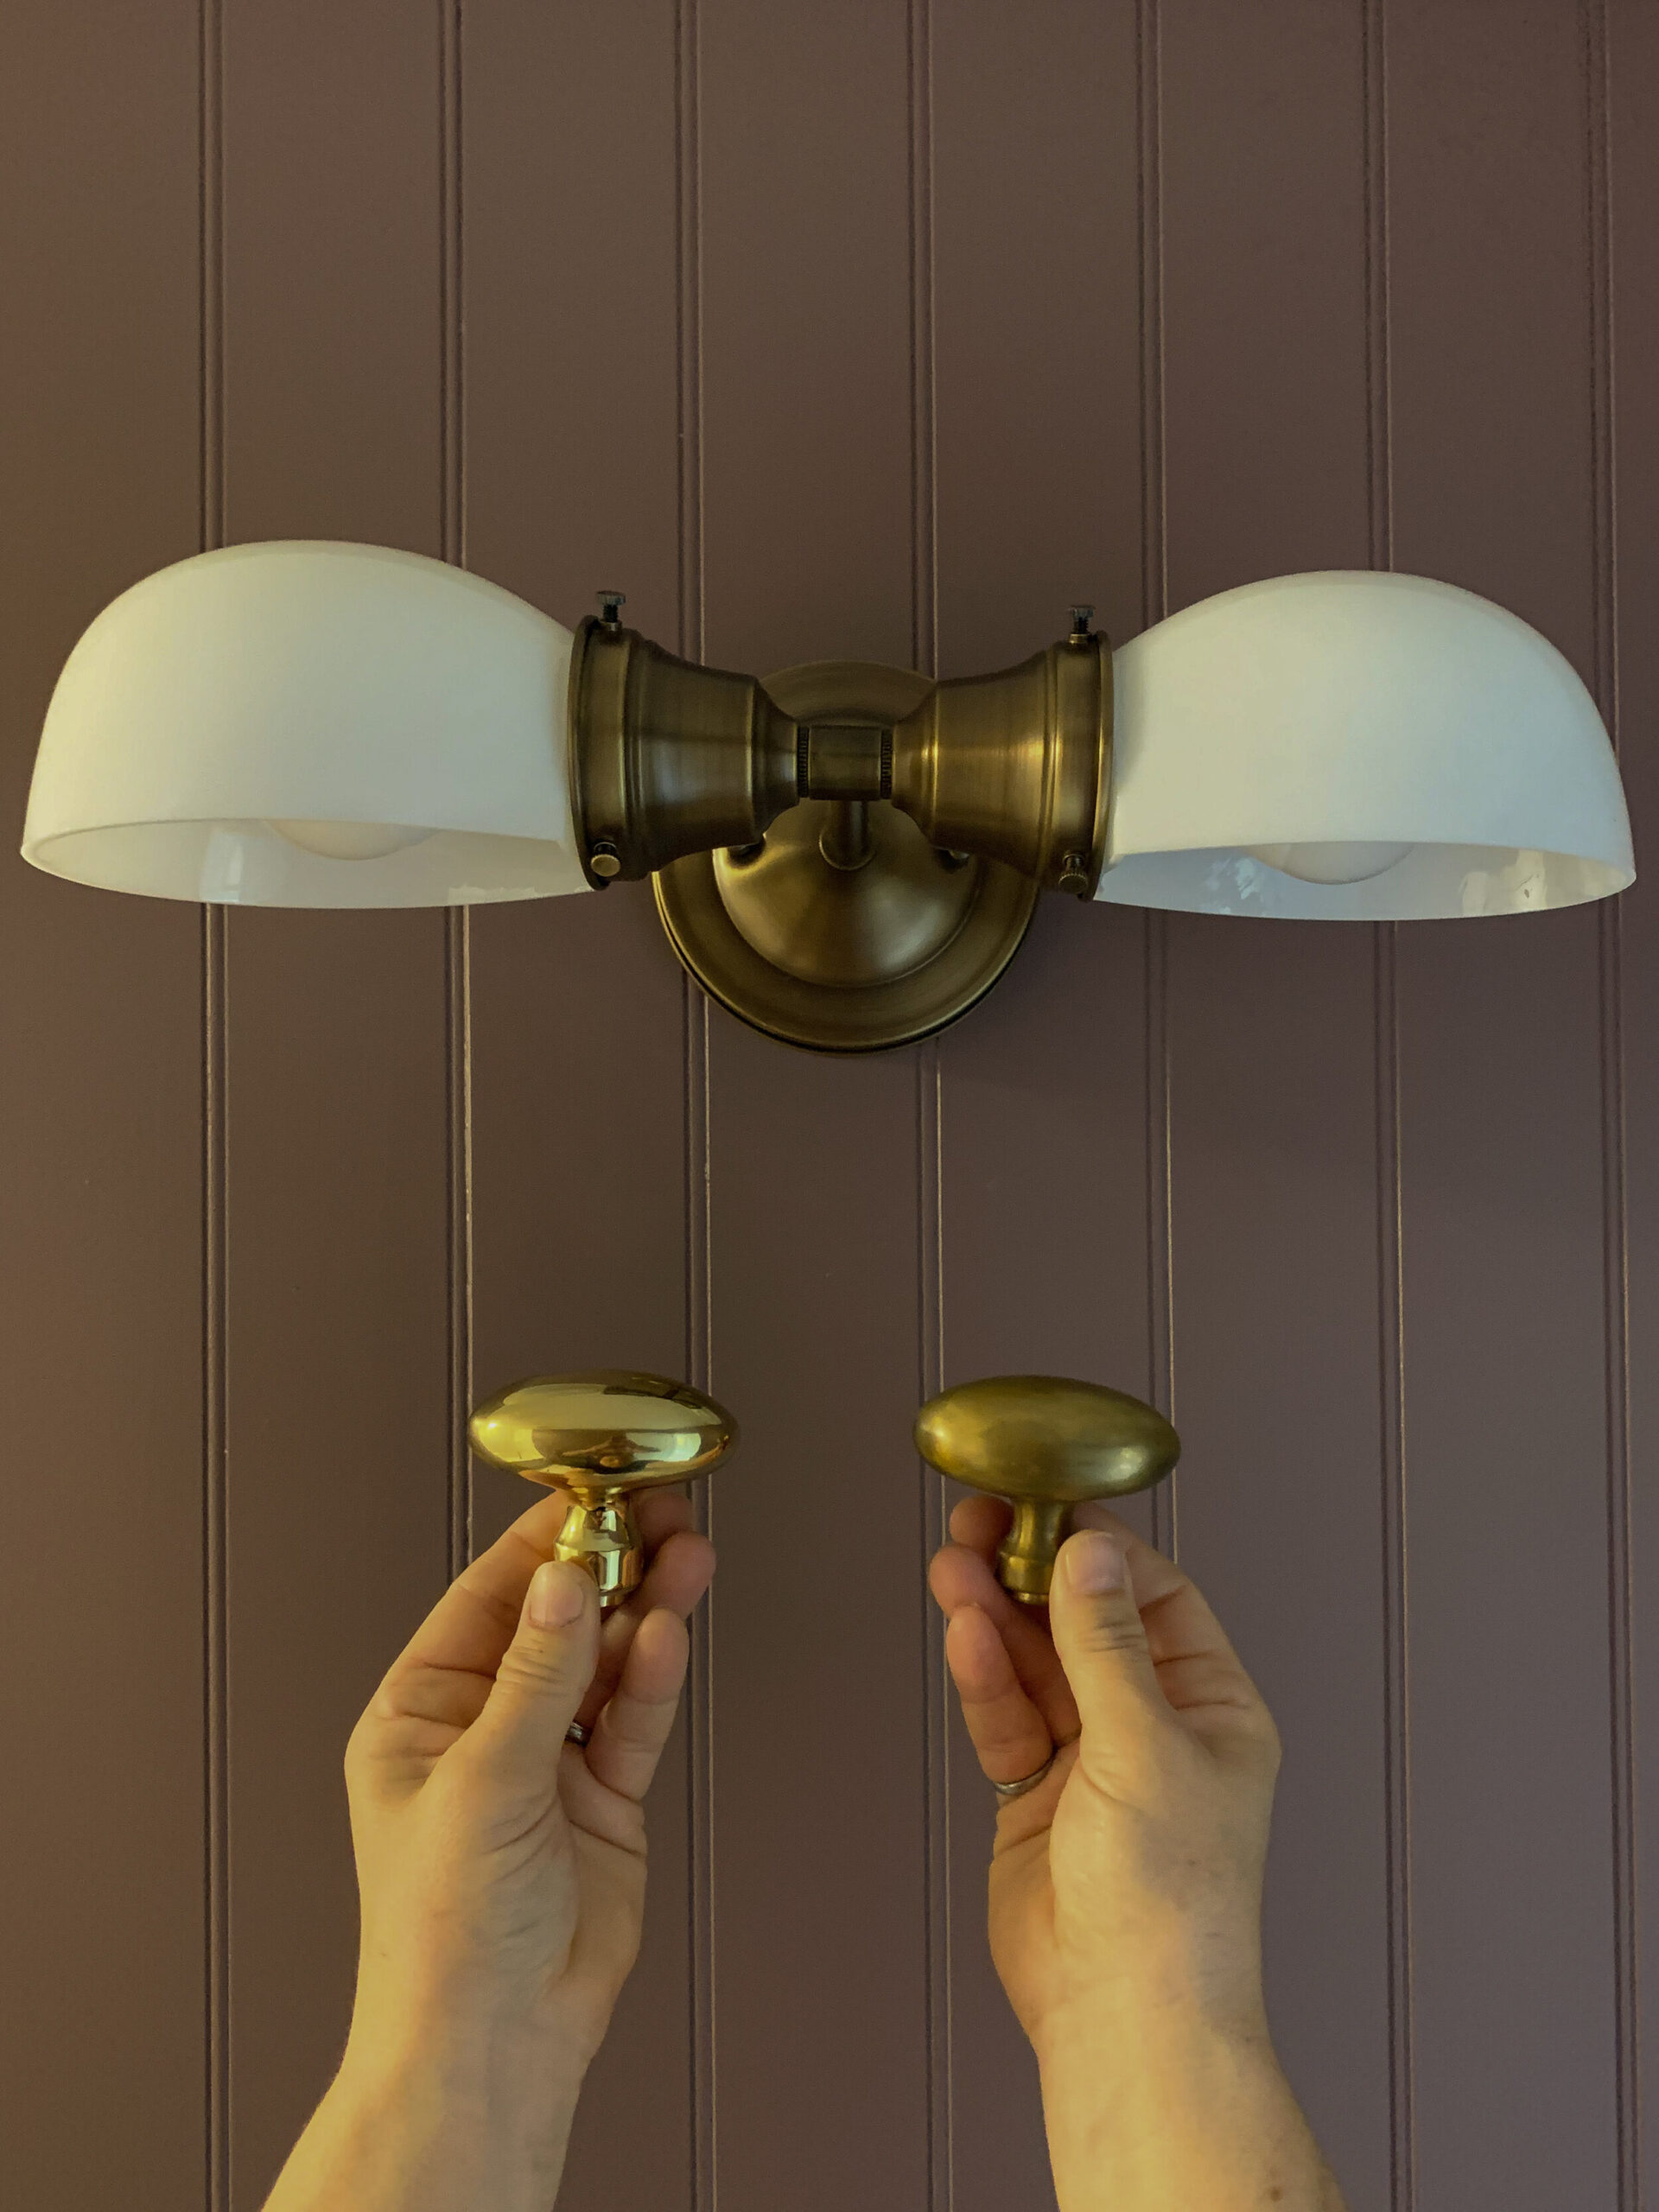 holding up the original laquered brass knob and the unlaquered and aged with vinegar knob to a aged brass light to compare